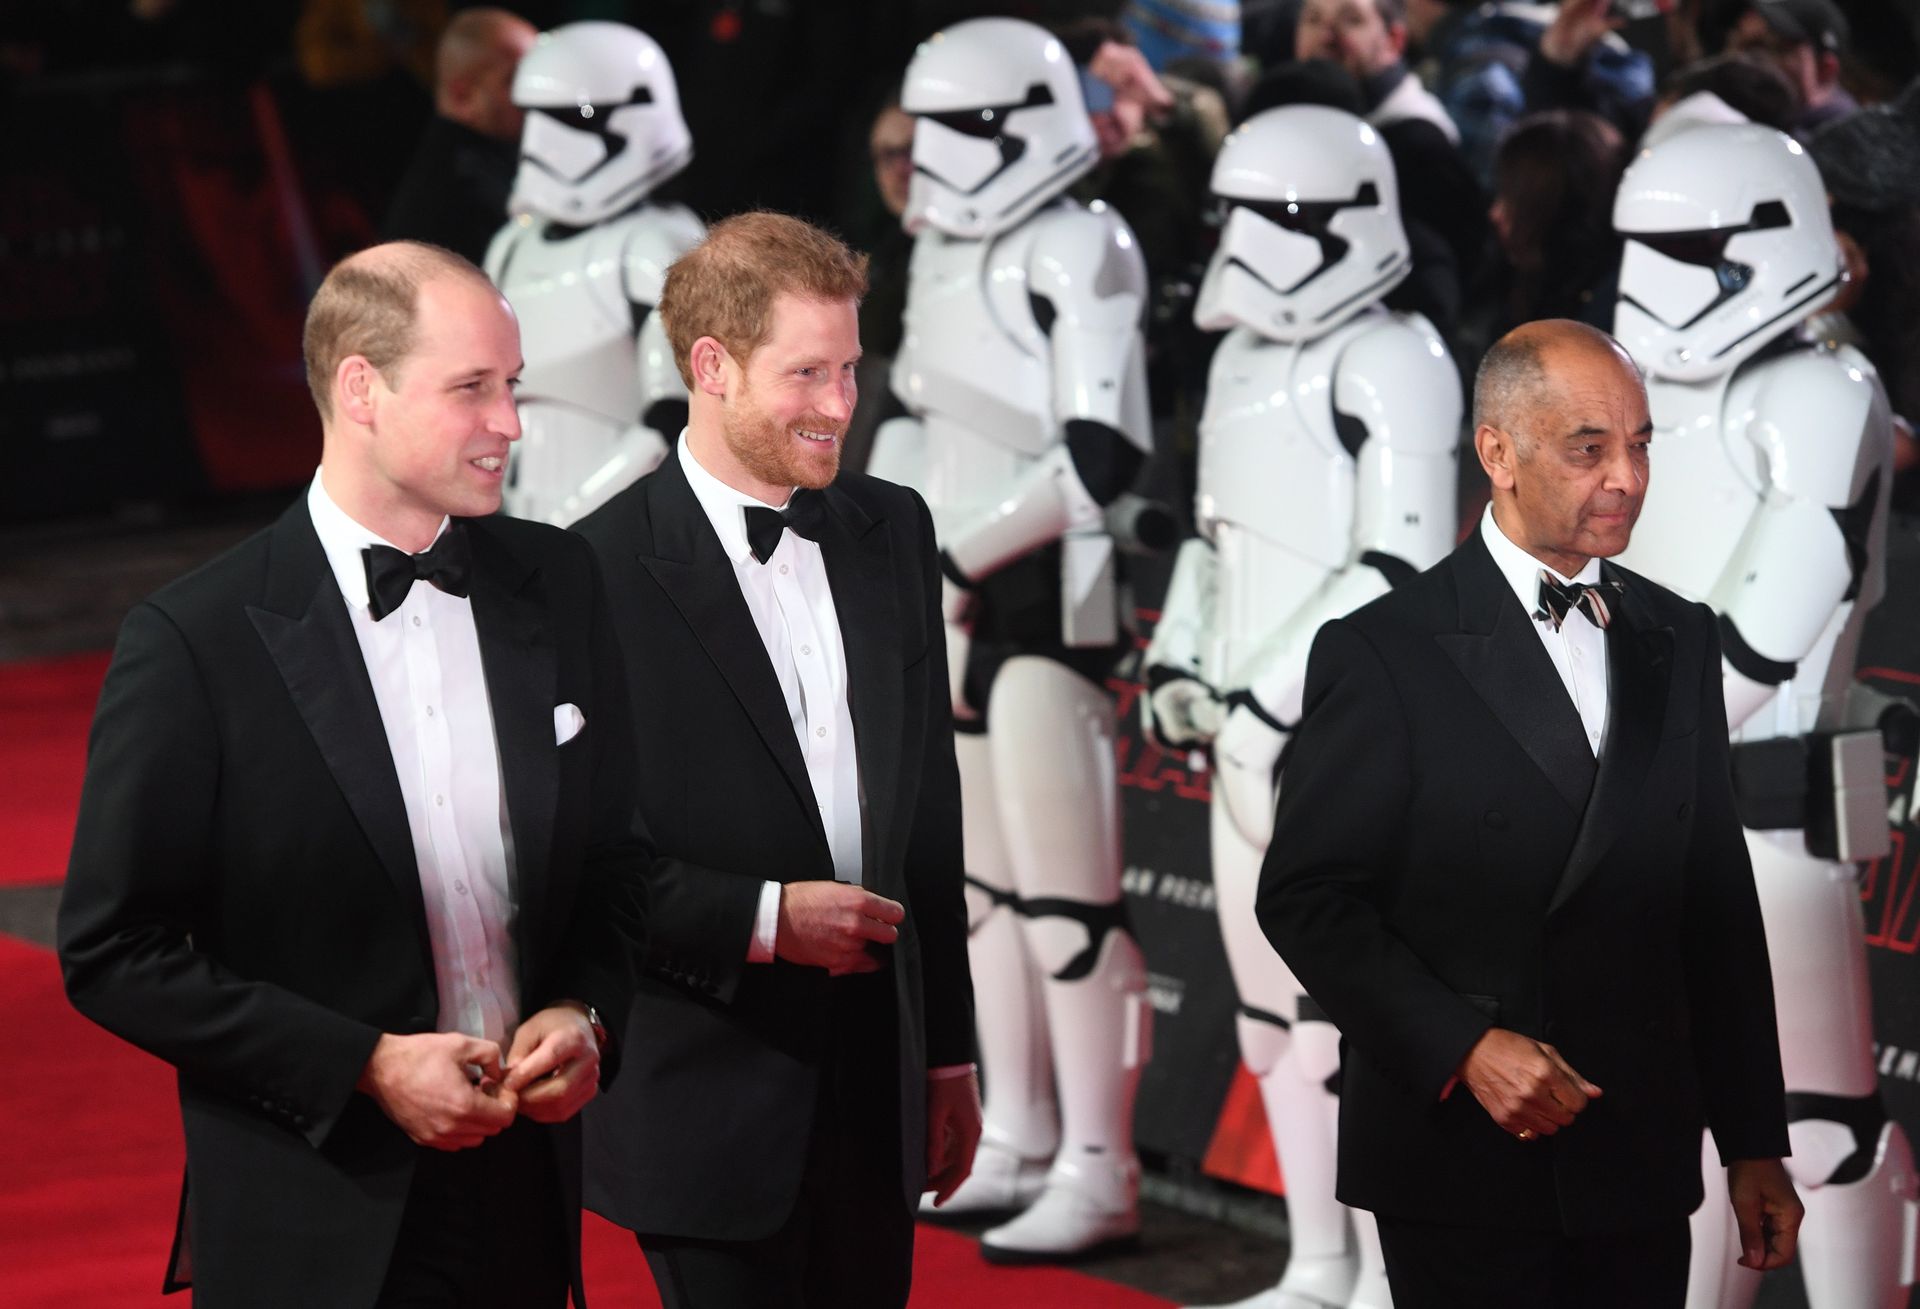 Prince William and Prince Harry walk past some Stormtroopers.